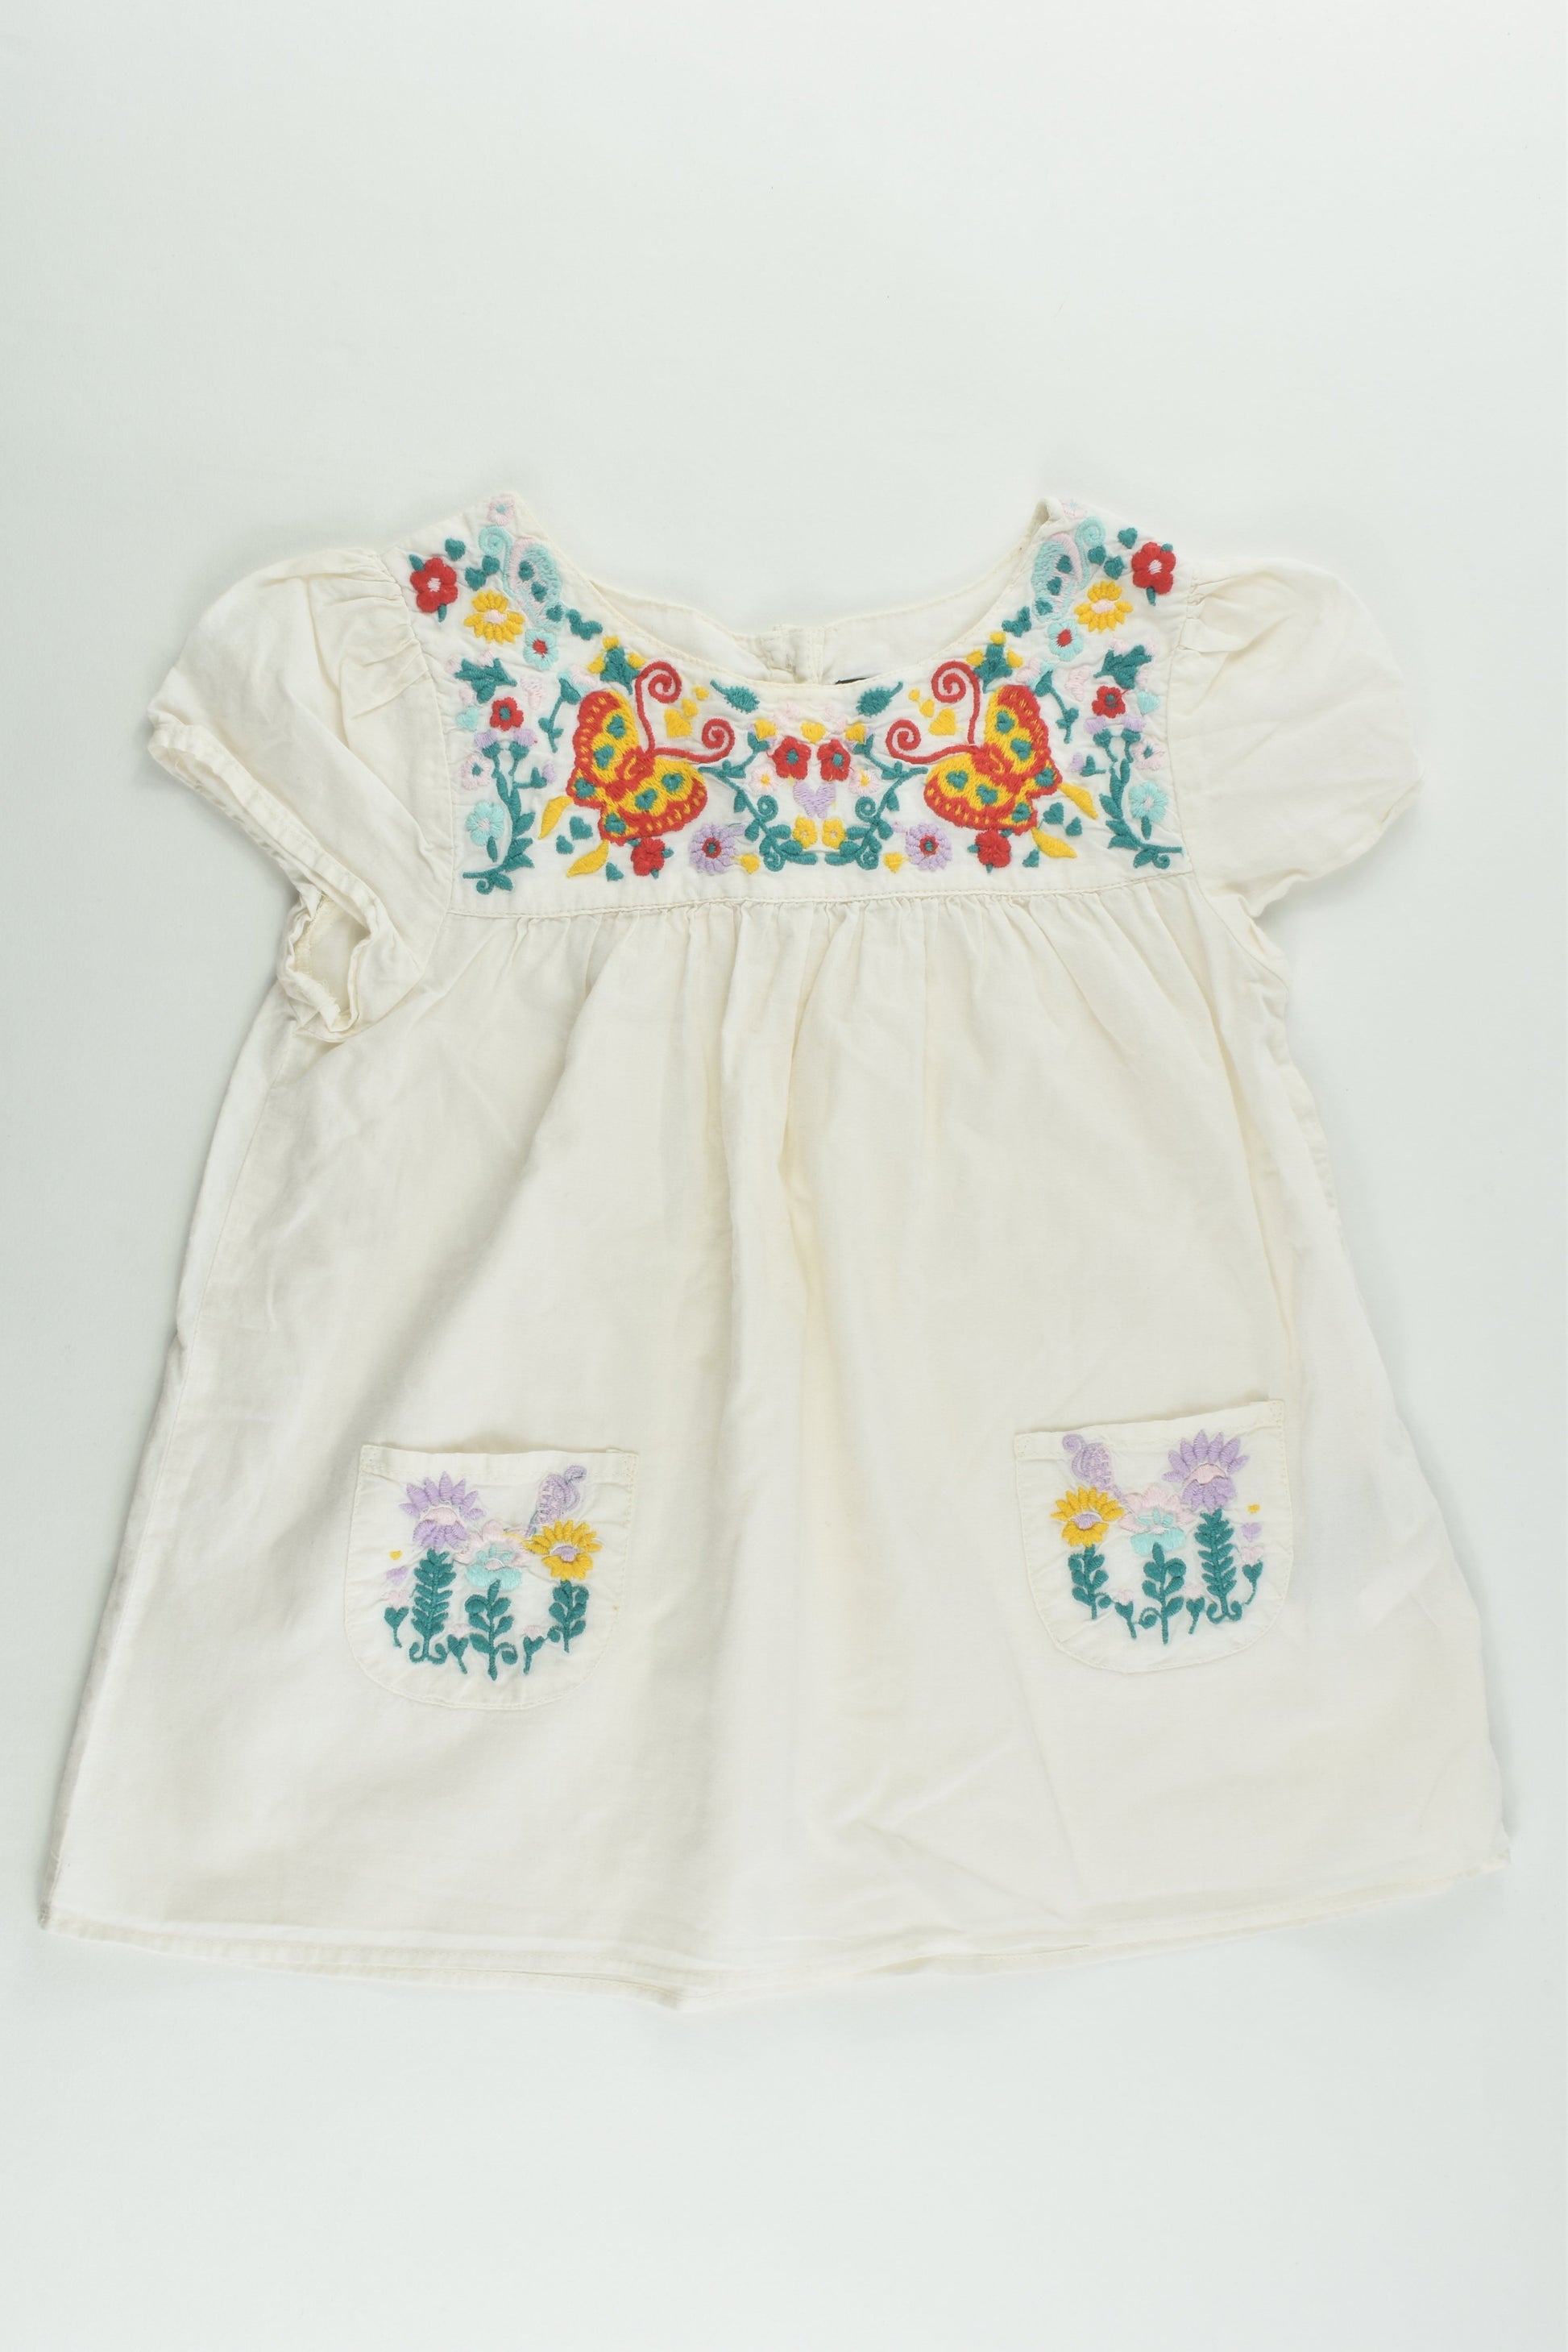 H&M Size 4 (104 cm) Blouse with Floral Embroidery